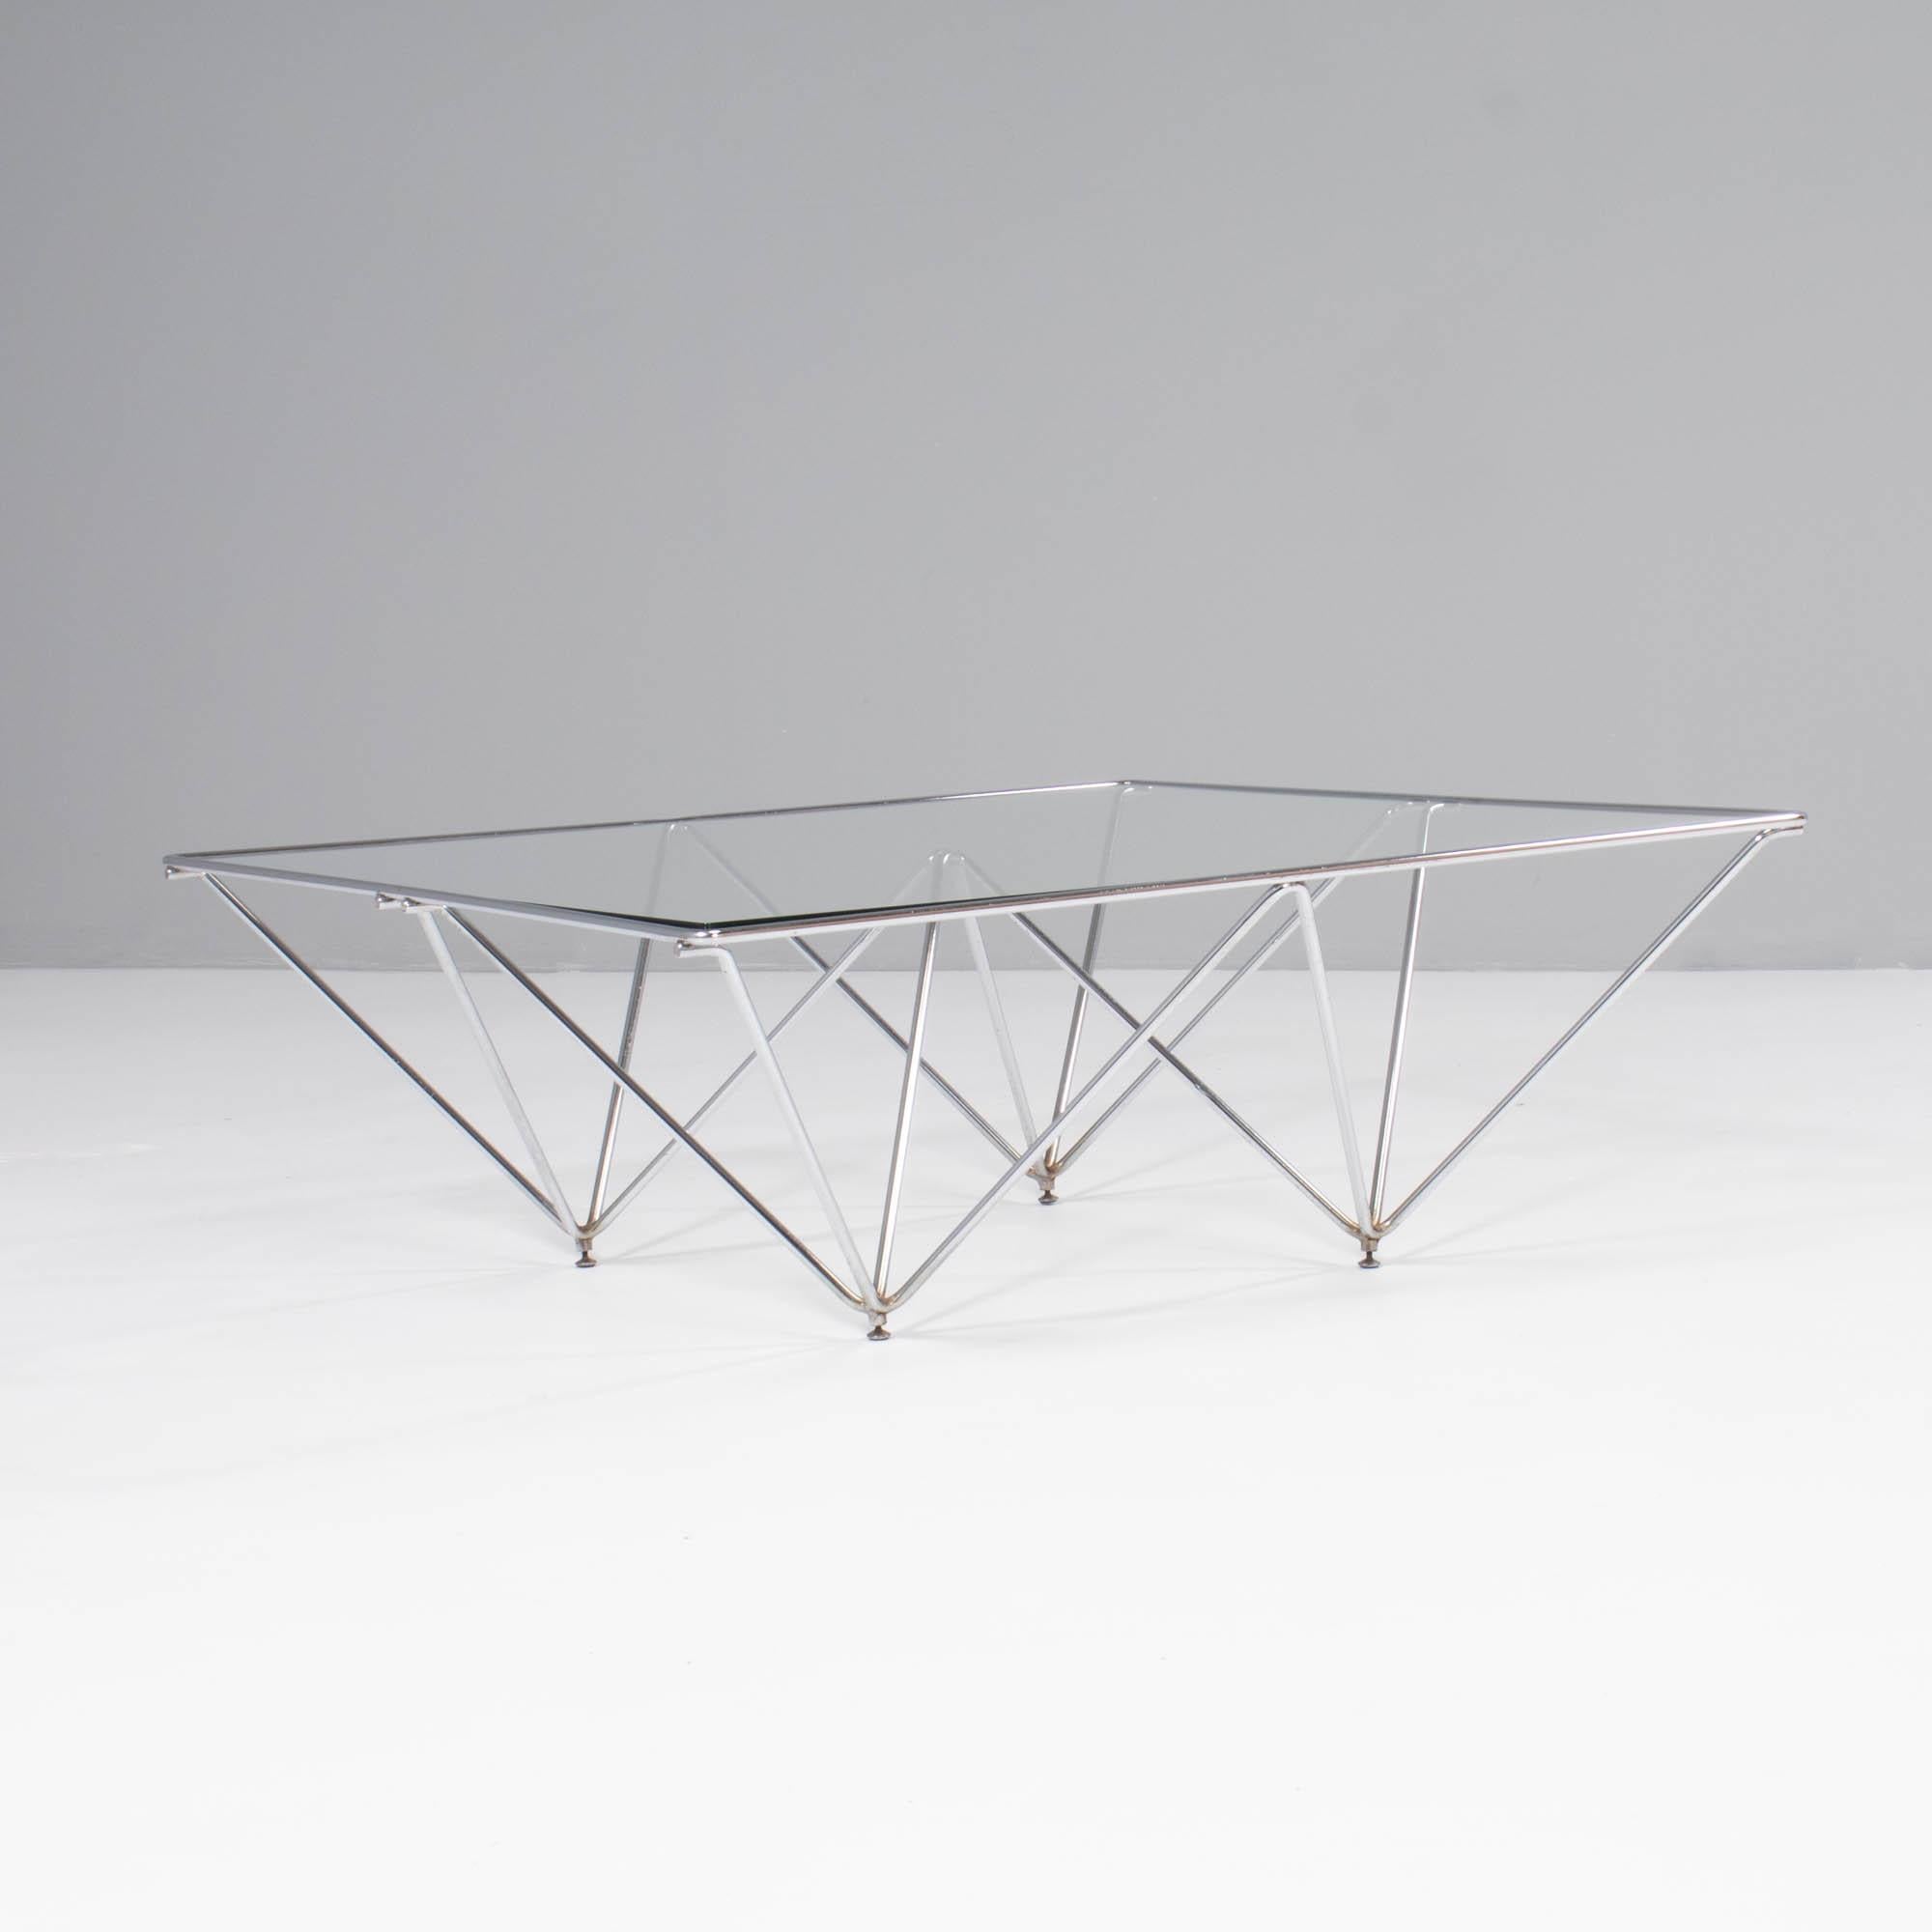 Originally designed by Paolo Piva for B&B Italia in the 1980s, the Alanda coffee table is a design classic which perfectly showcases Piva’s architectural style.

The chromed steel base is made up of a geodetic frame, creating an upturned pyramid